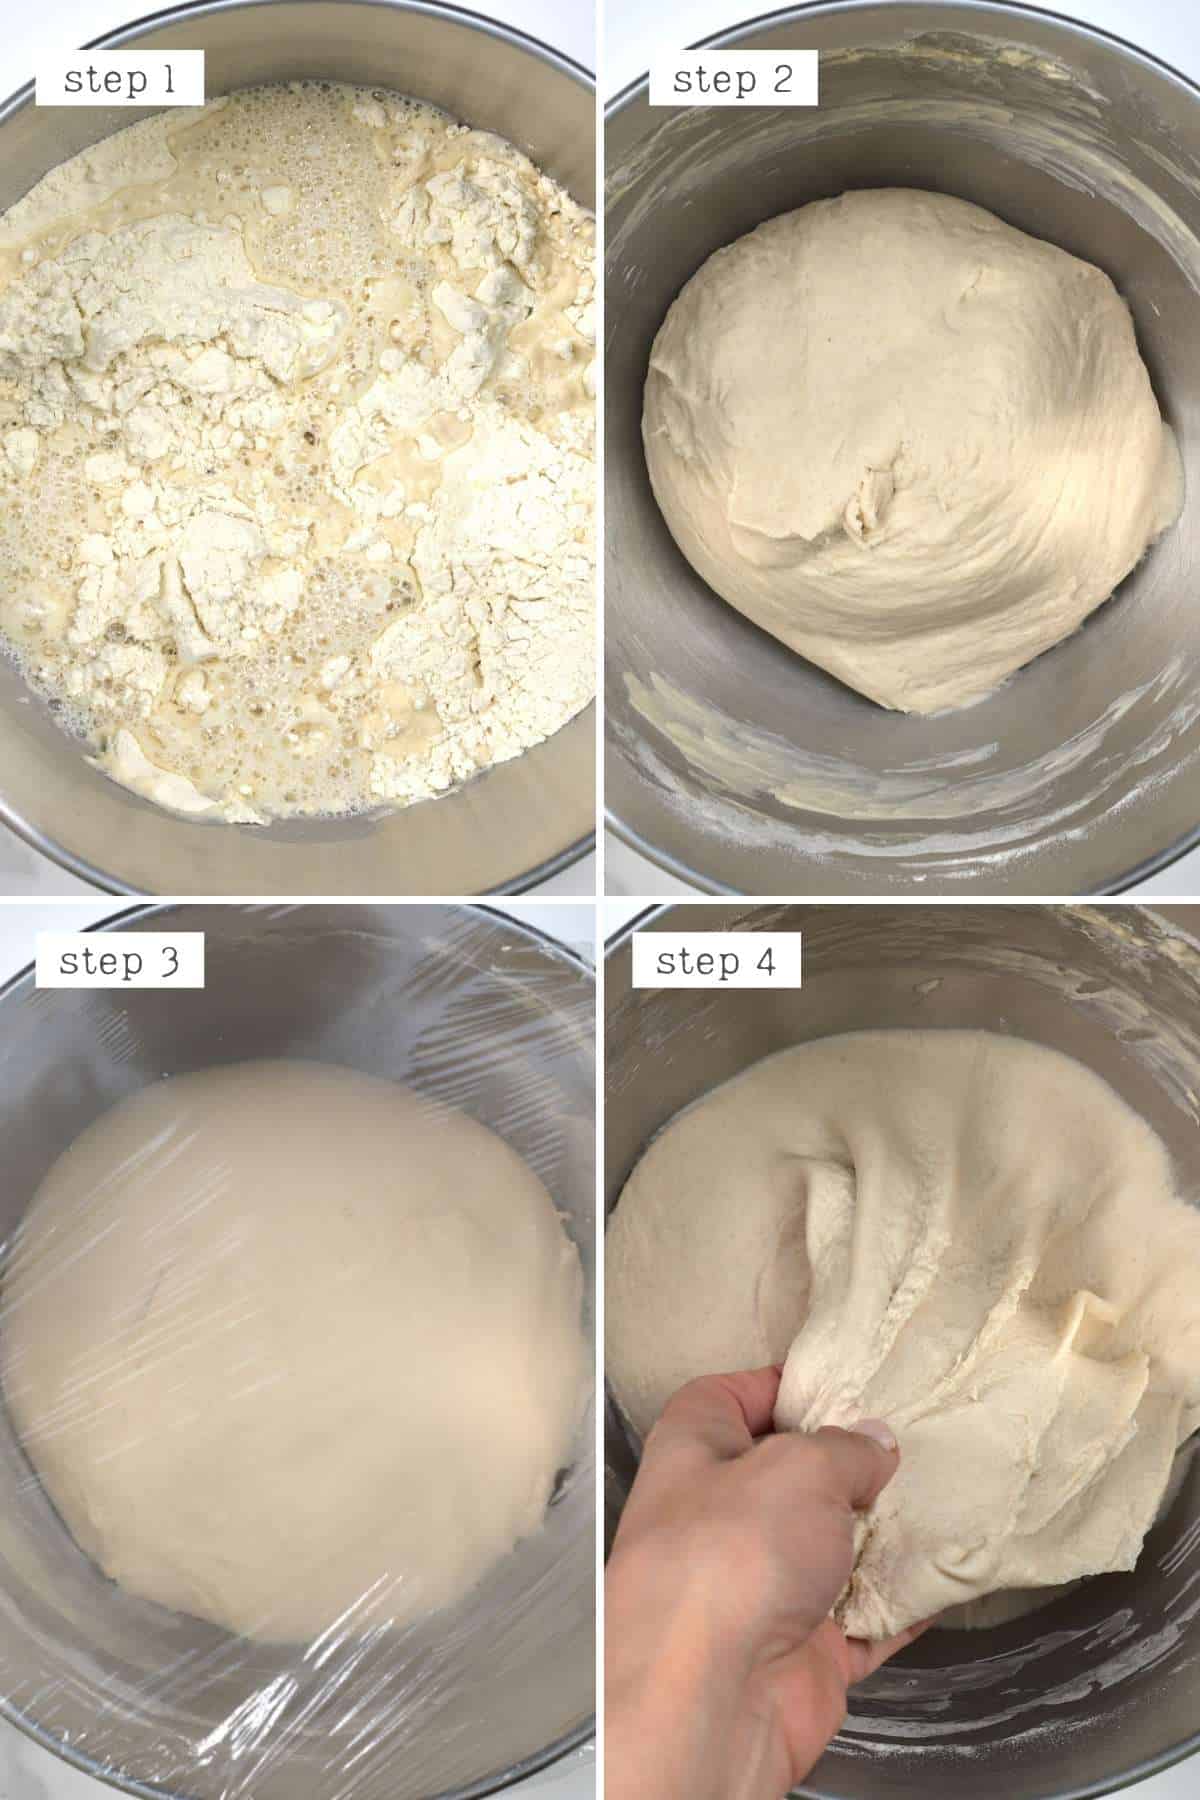 Steps for preparing dough with water